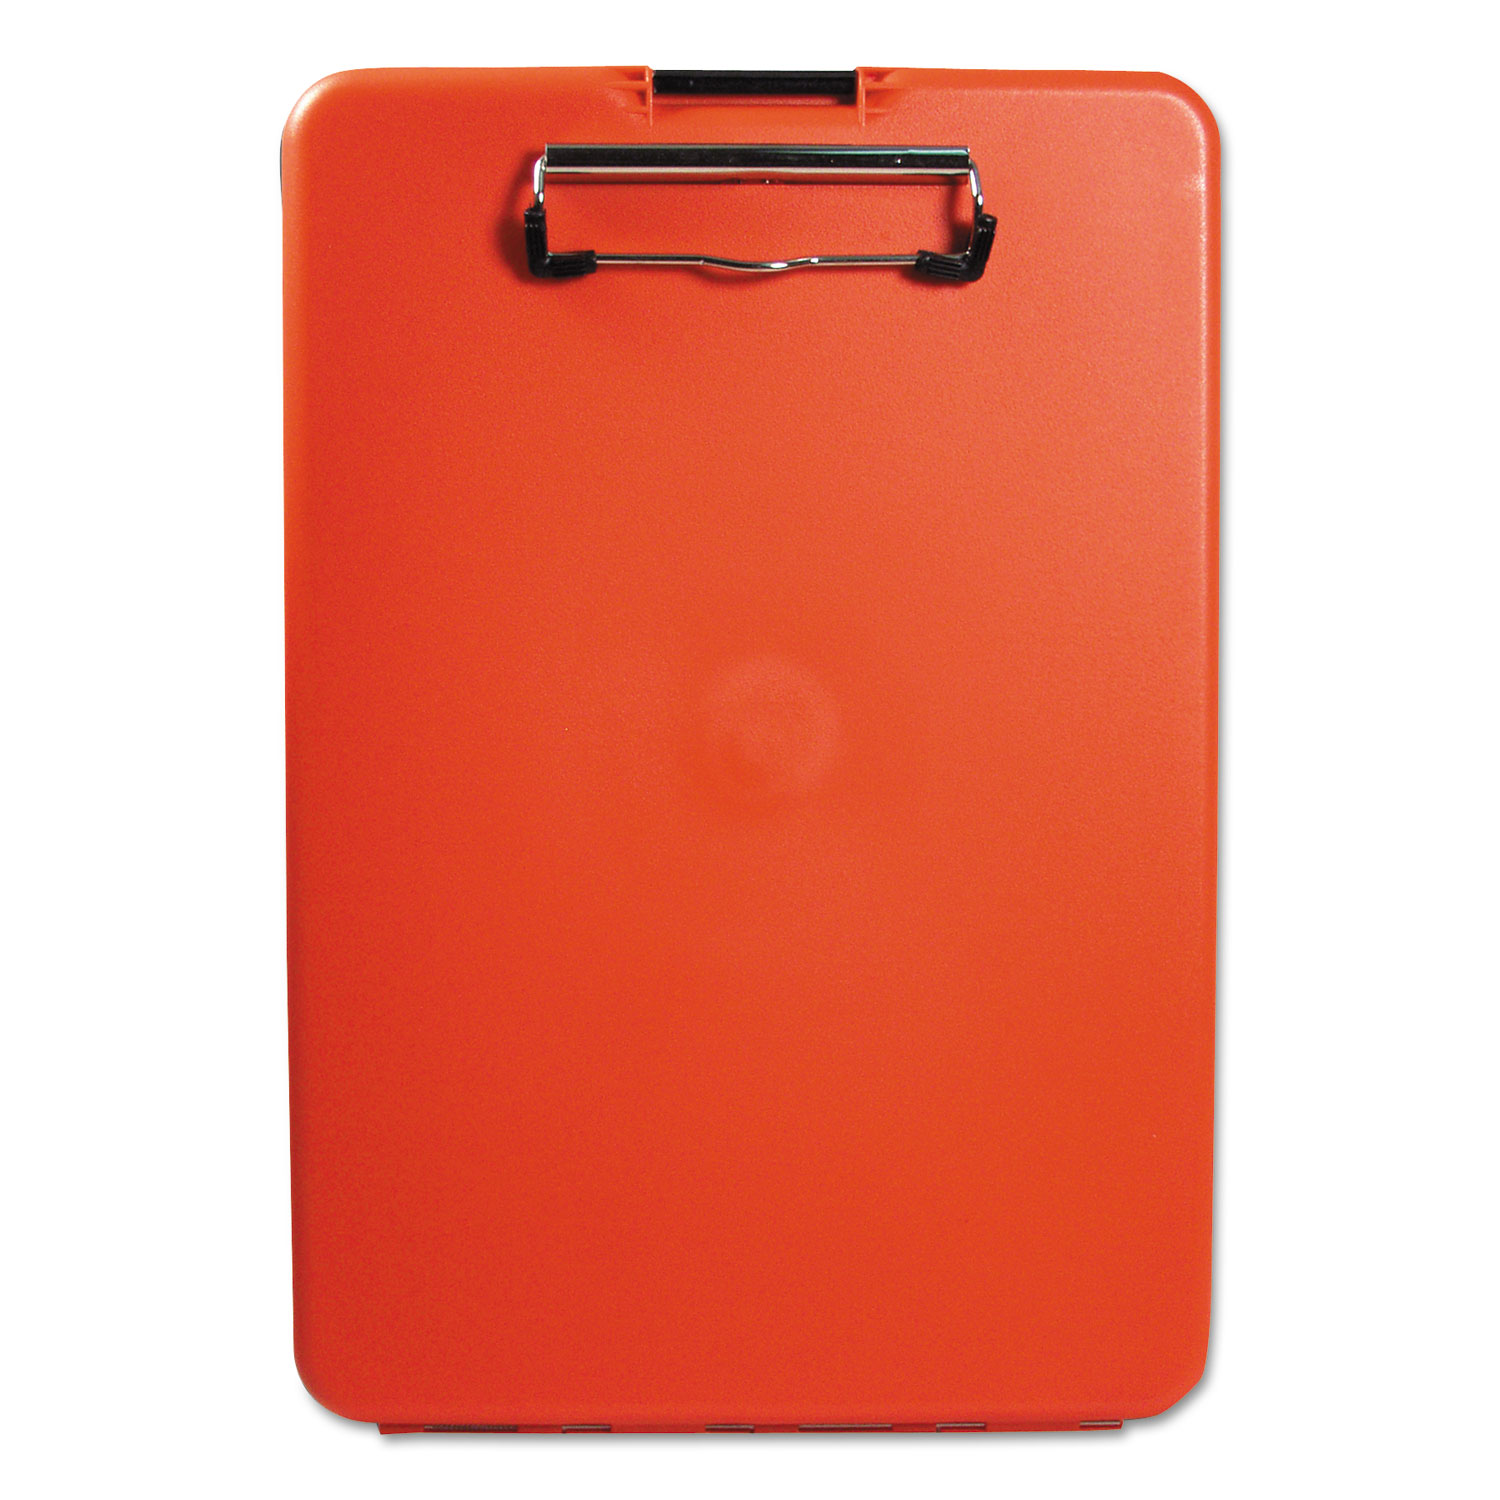 SlimMate Storage Clipboard, 1/2 Clip Cap, 8 1/2 x 11 Sheets, Red